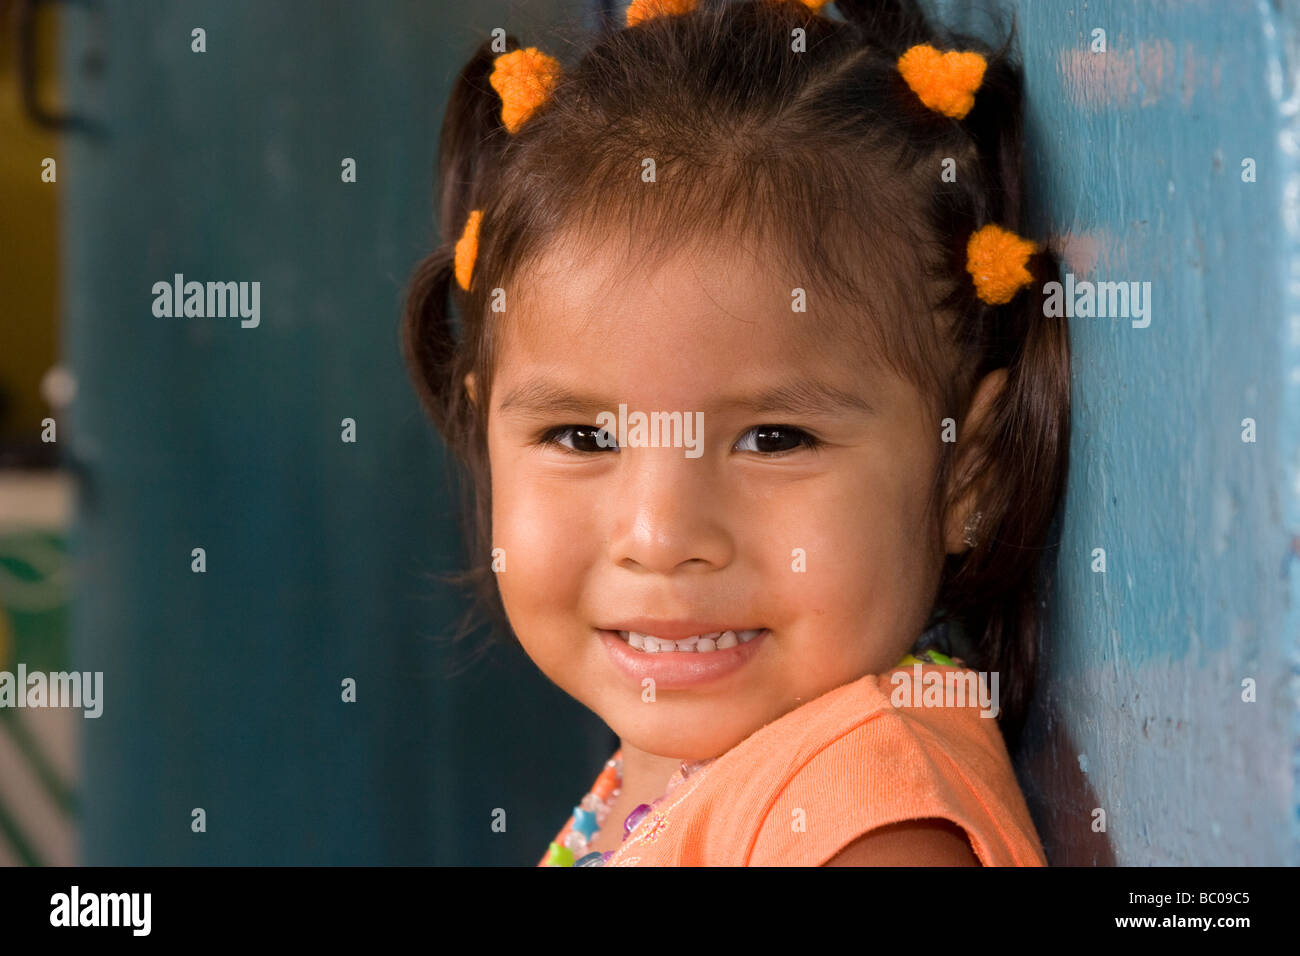 Young girl smiles for the camera. San Miguelito, Panama City, Republic of Panama, Central America Stock Photo